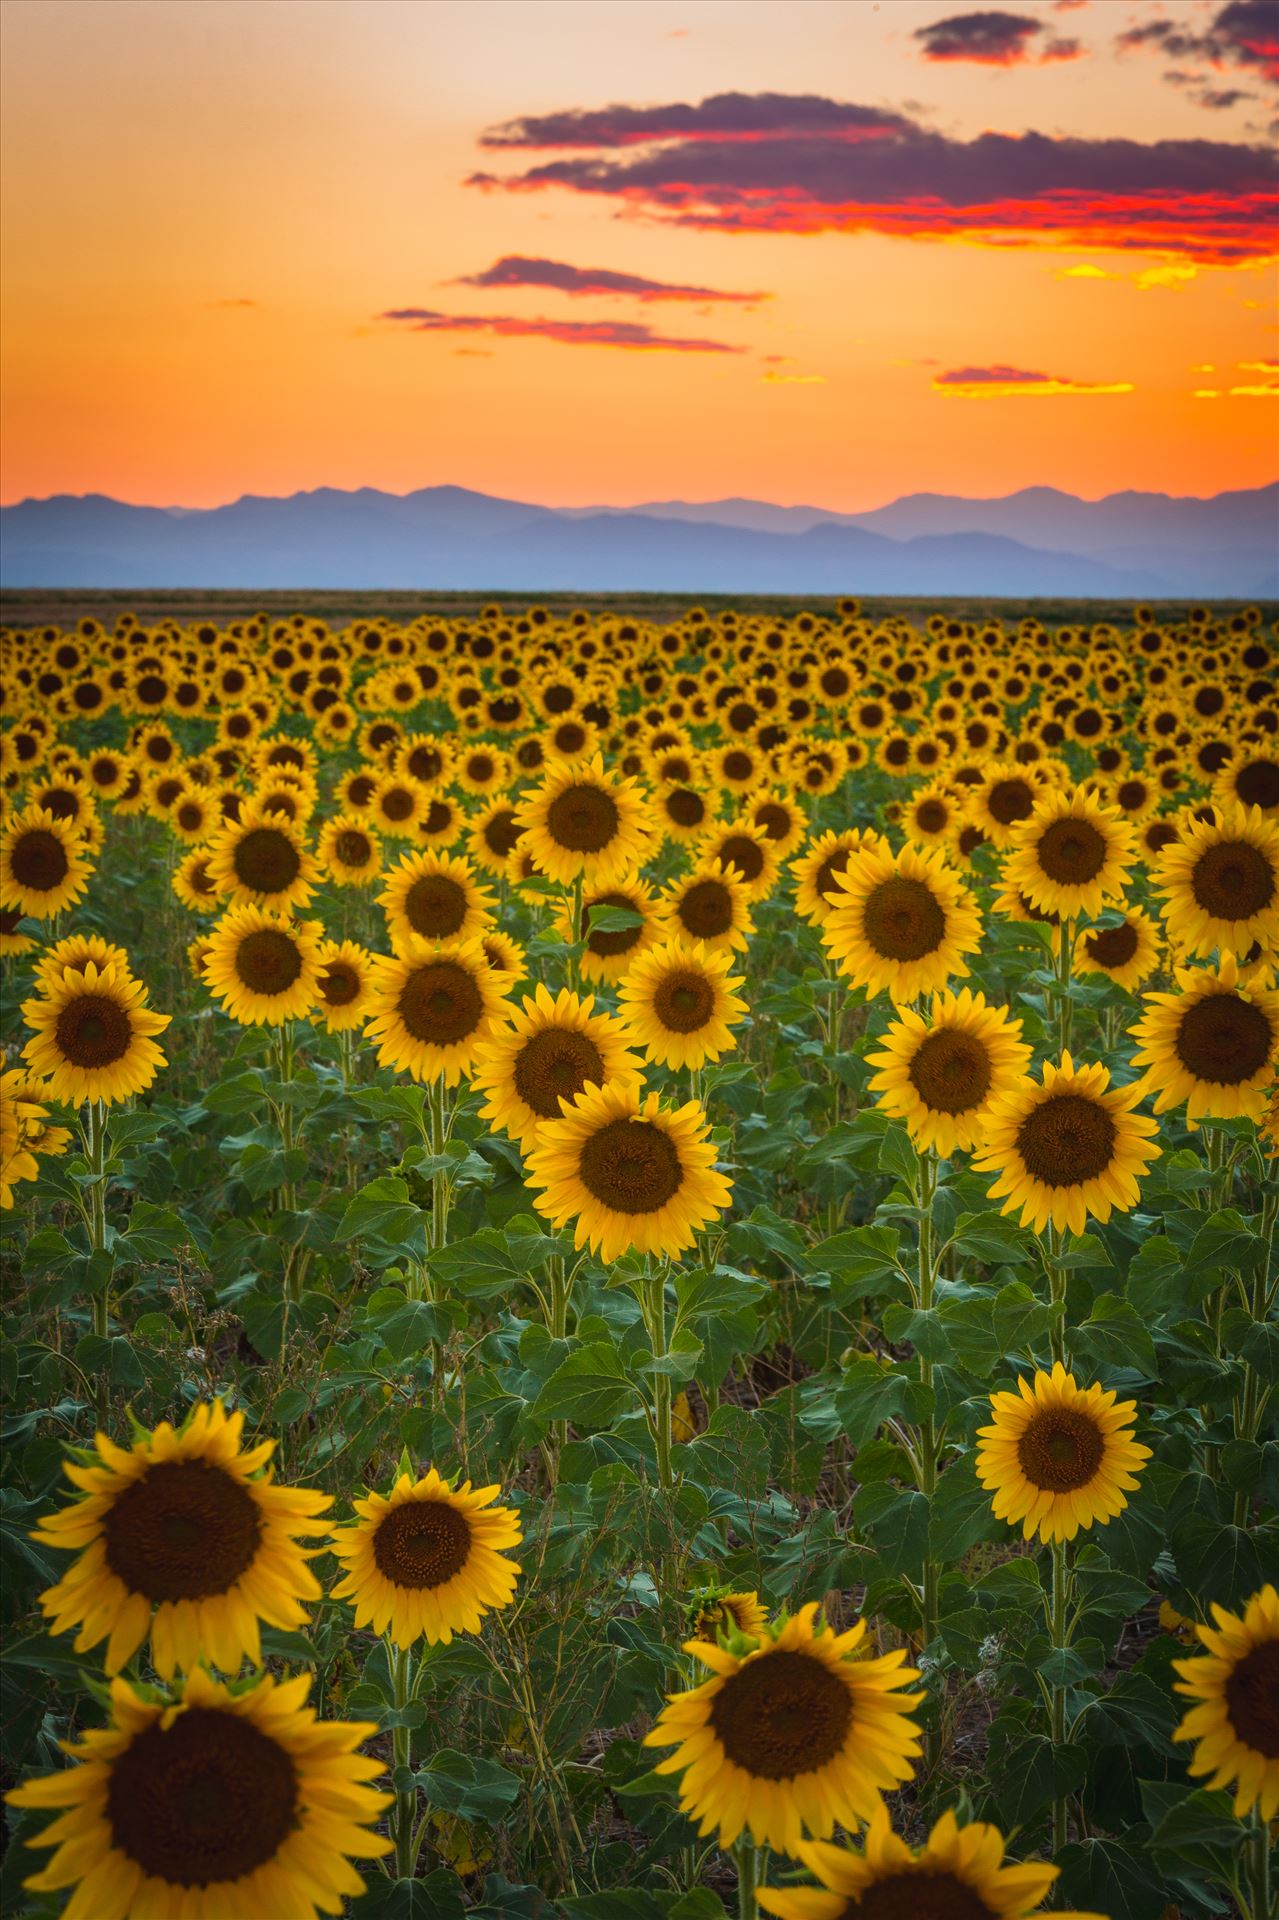 Denver Sunflowers at Sunset No 2 Sunflower fields near Denver International Airport, on August 20th, 2016. Near 56th and E470. by Scott Smith Photos